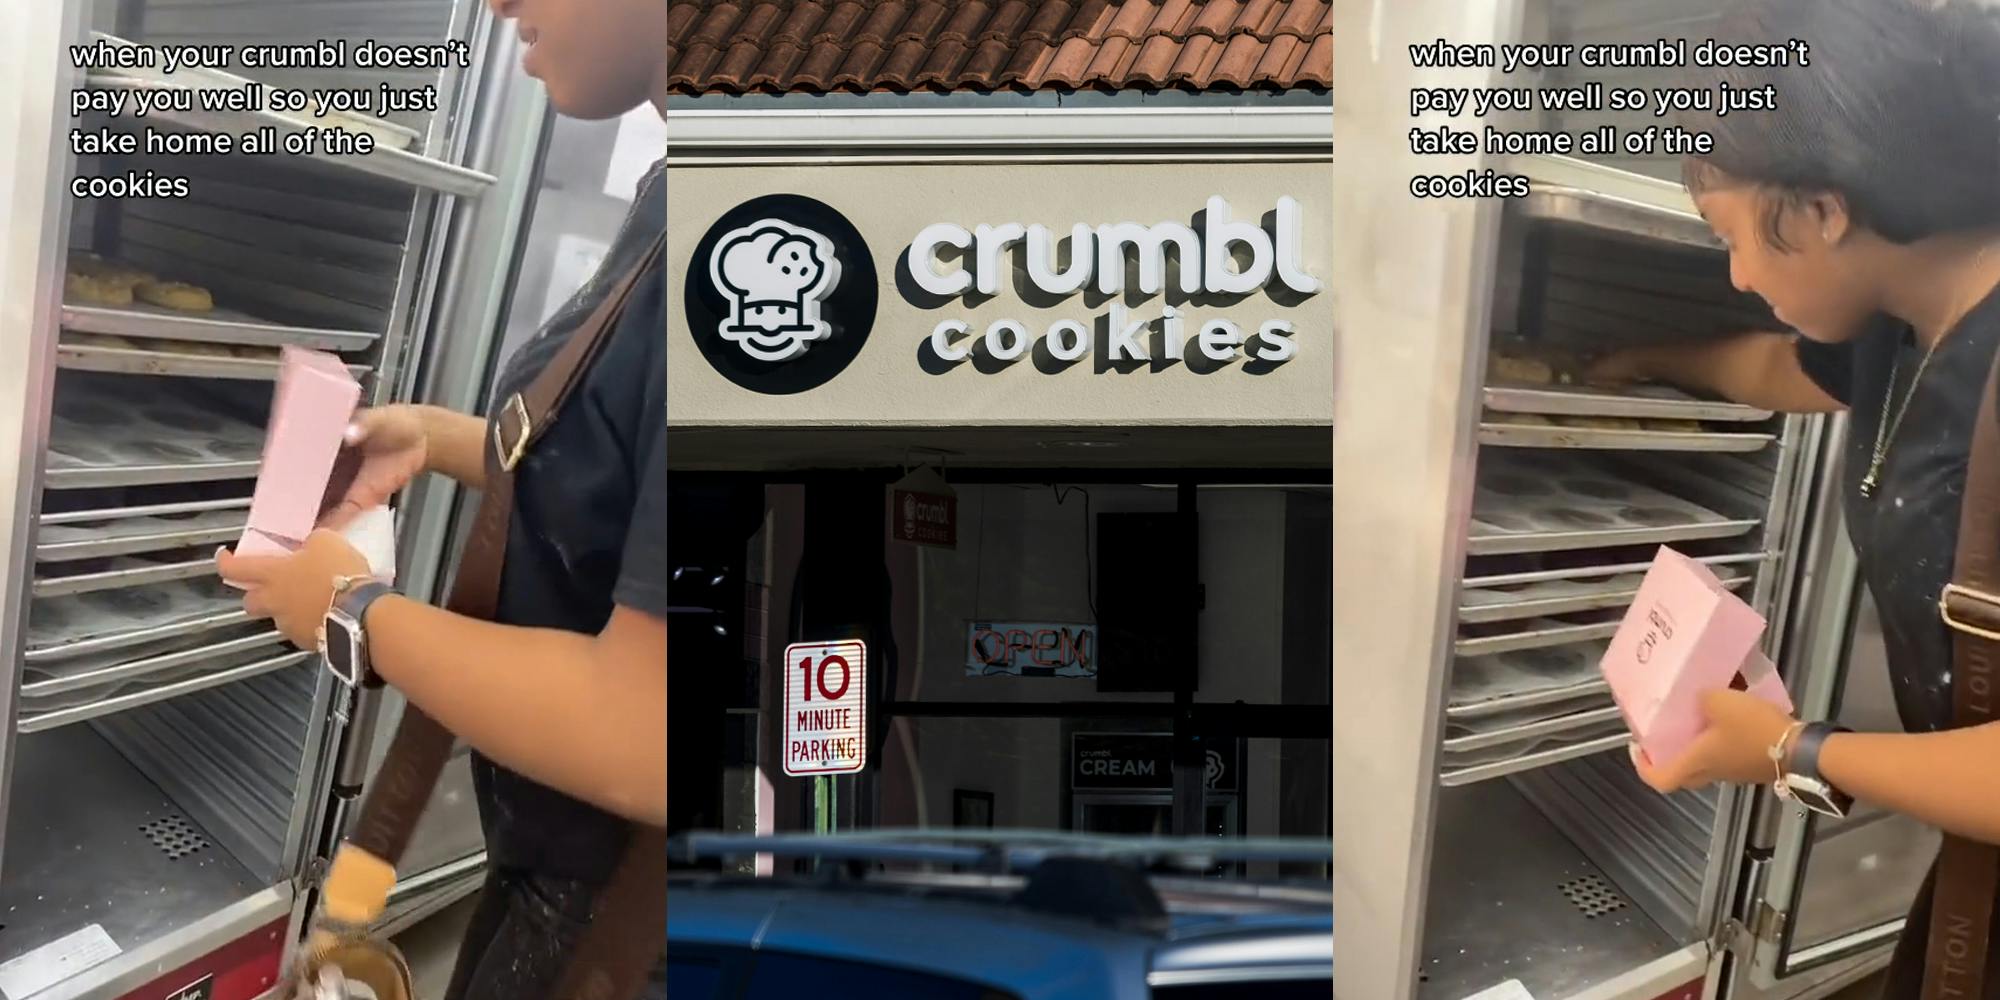 Crumbl employee grabbing cookie caption "when your crumbl doesn't pay you well so you just take home all of the cookies" (l) Crumbl Cookies sign on building (c) Crumbl employee grabbing cookie caption "when your crumbl doesn't pay you well so you just take home all of the cookies" (r)